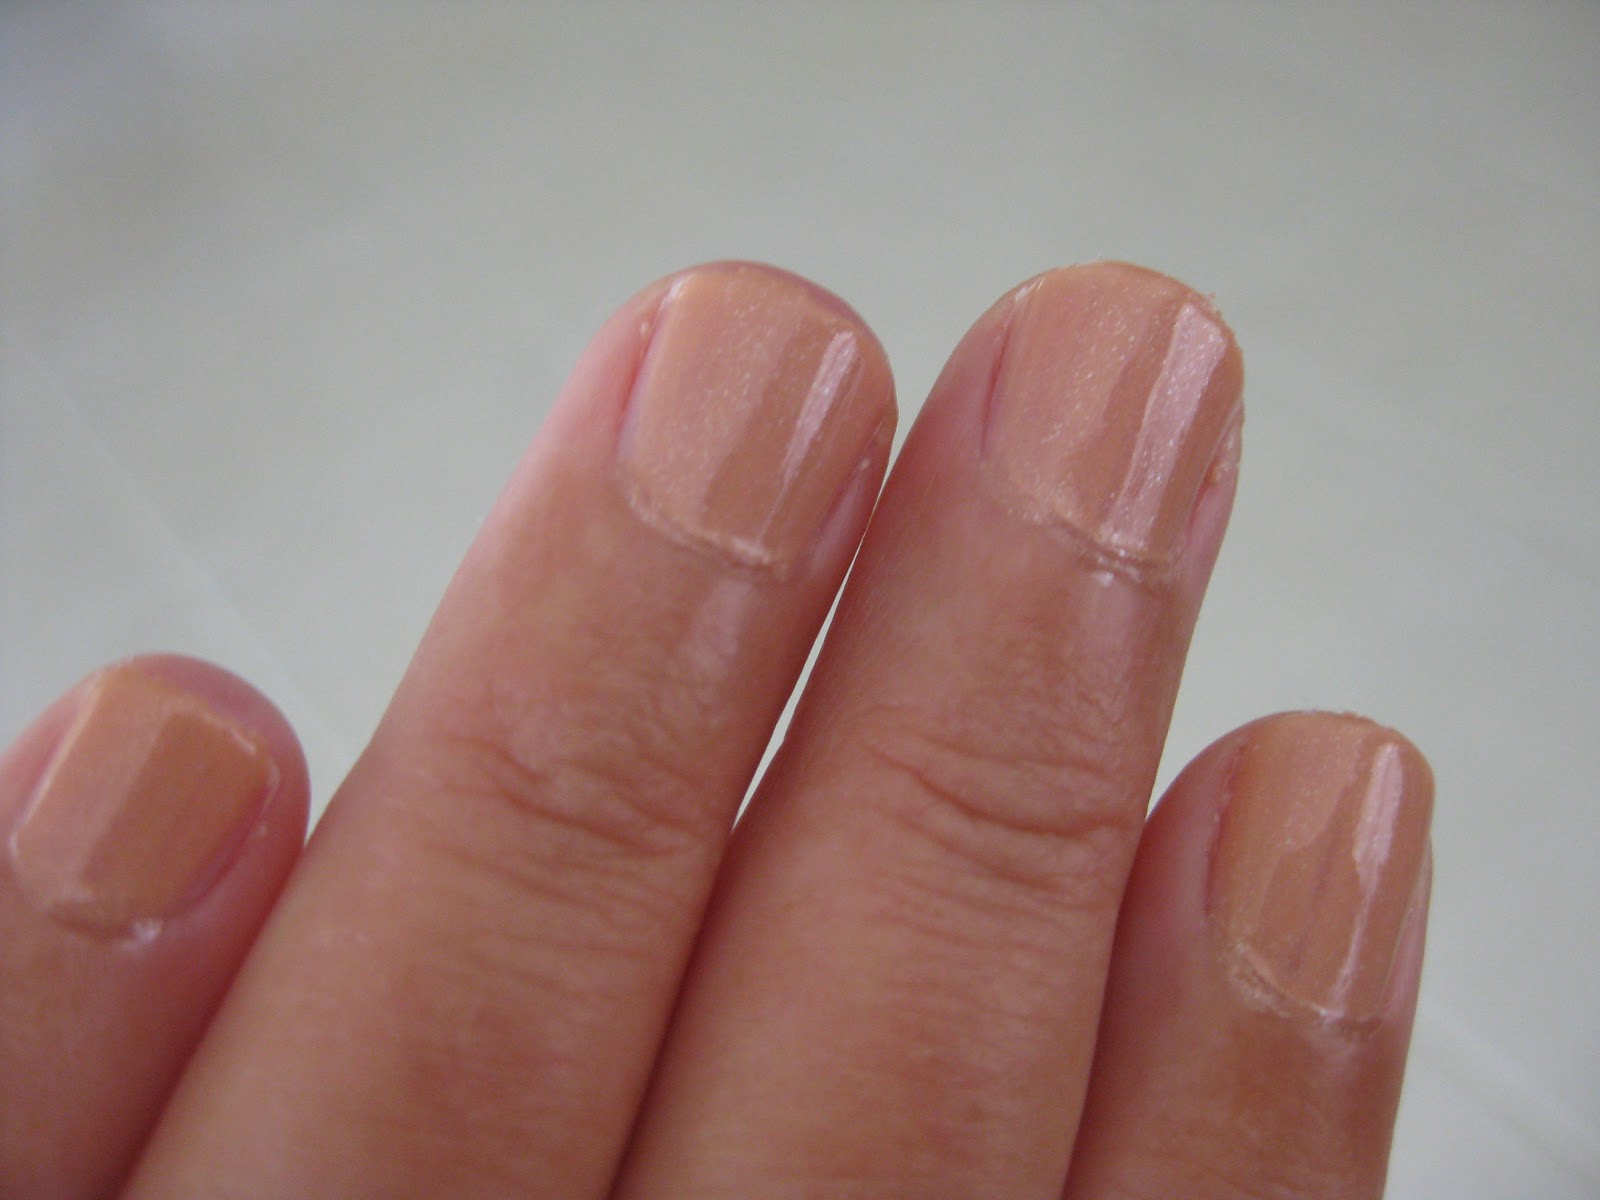 1. OPI Nail Lacquer in "Skinny Dip" - wide 10